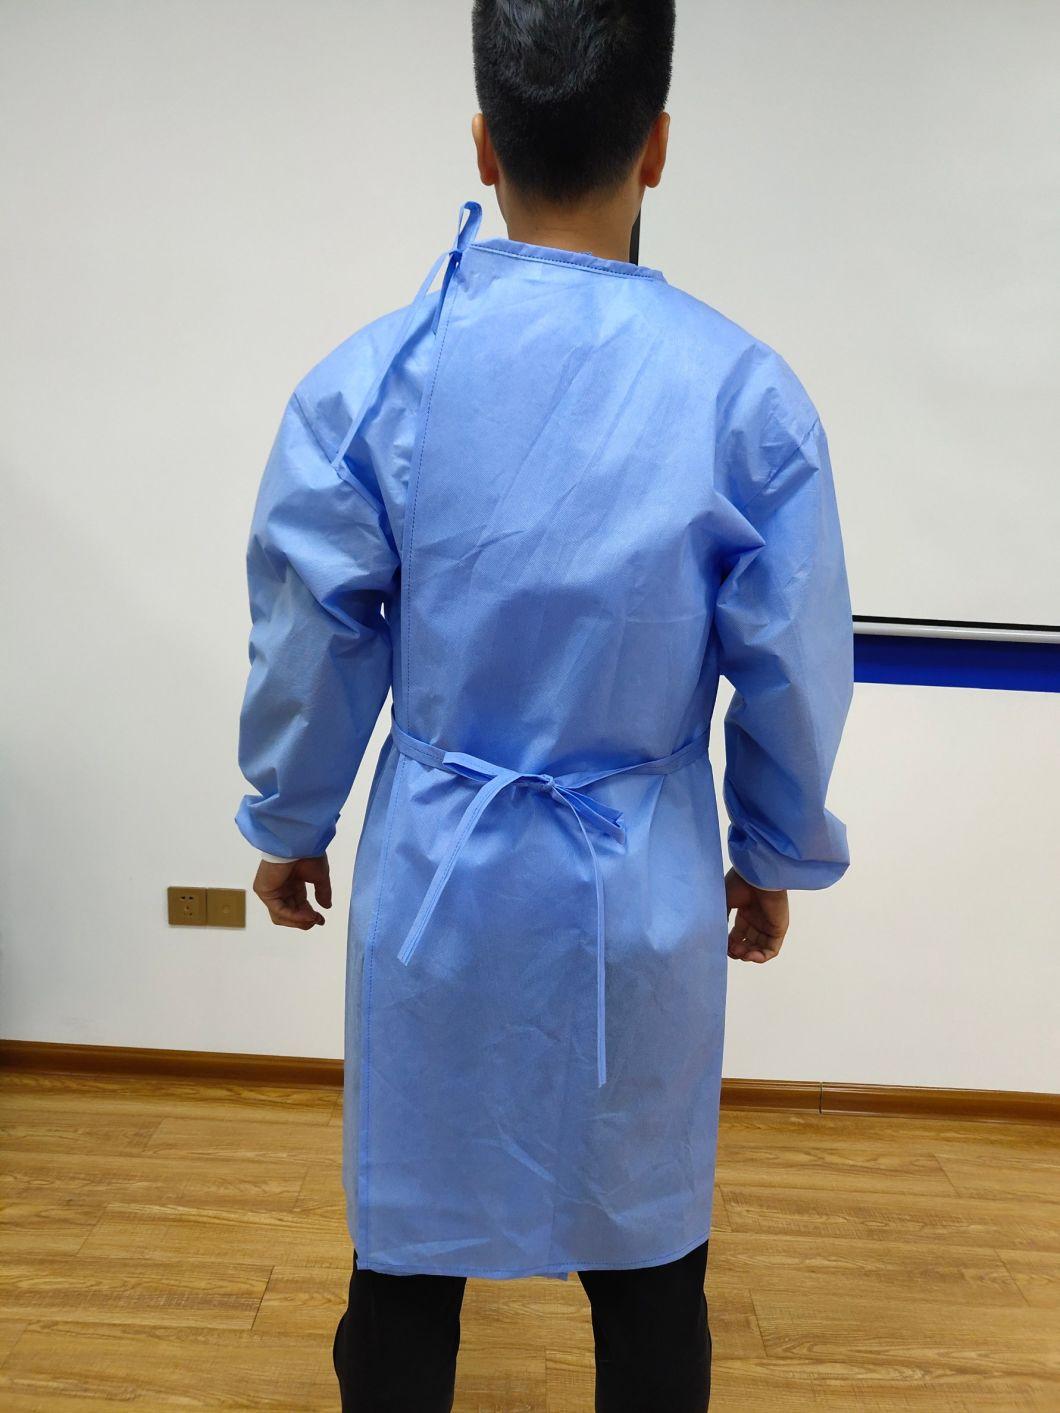 Safety Protect Coverall for Protection Surgical Gowns Clothing